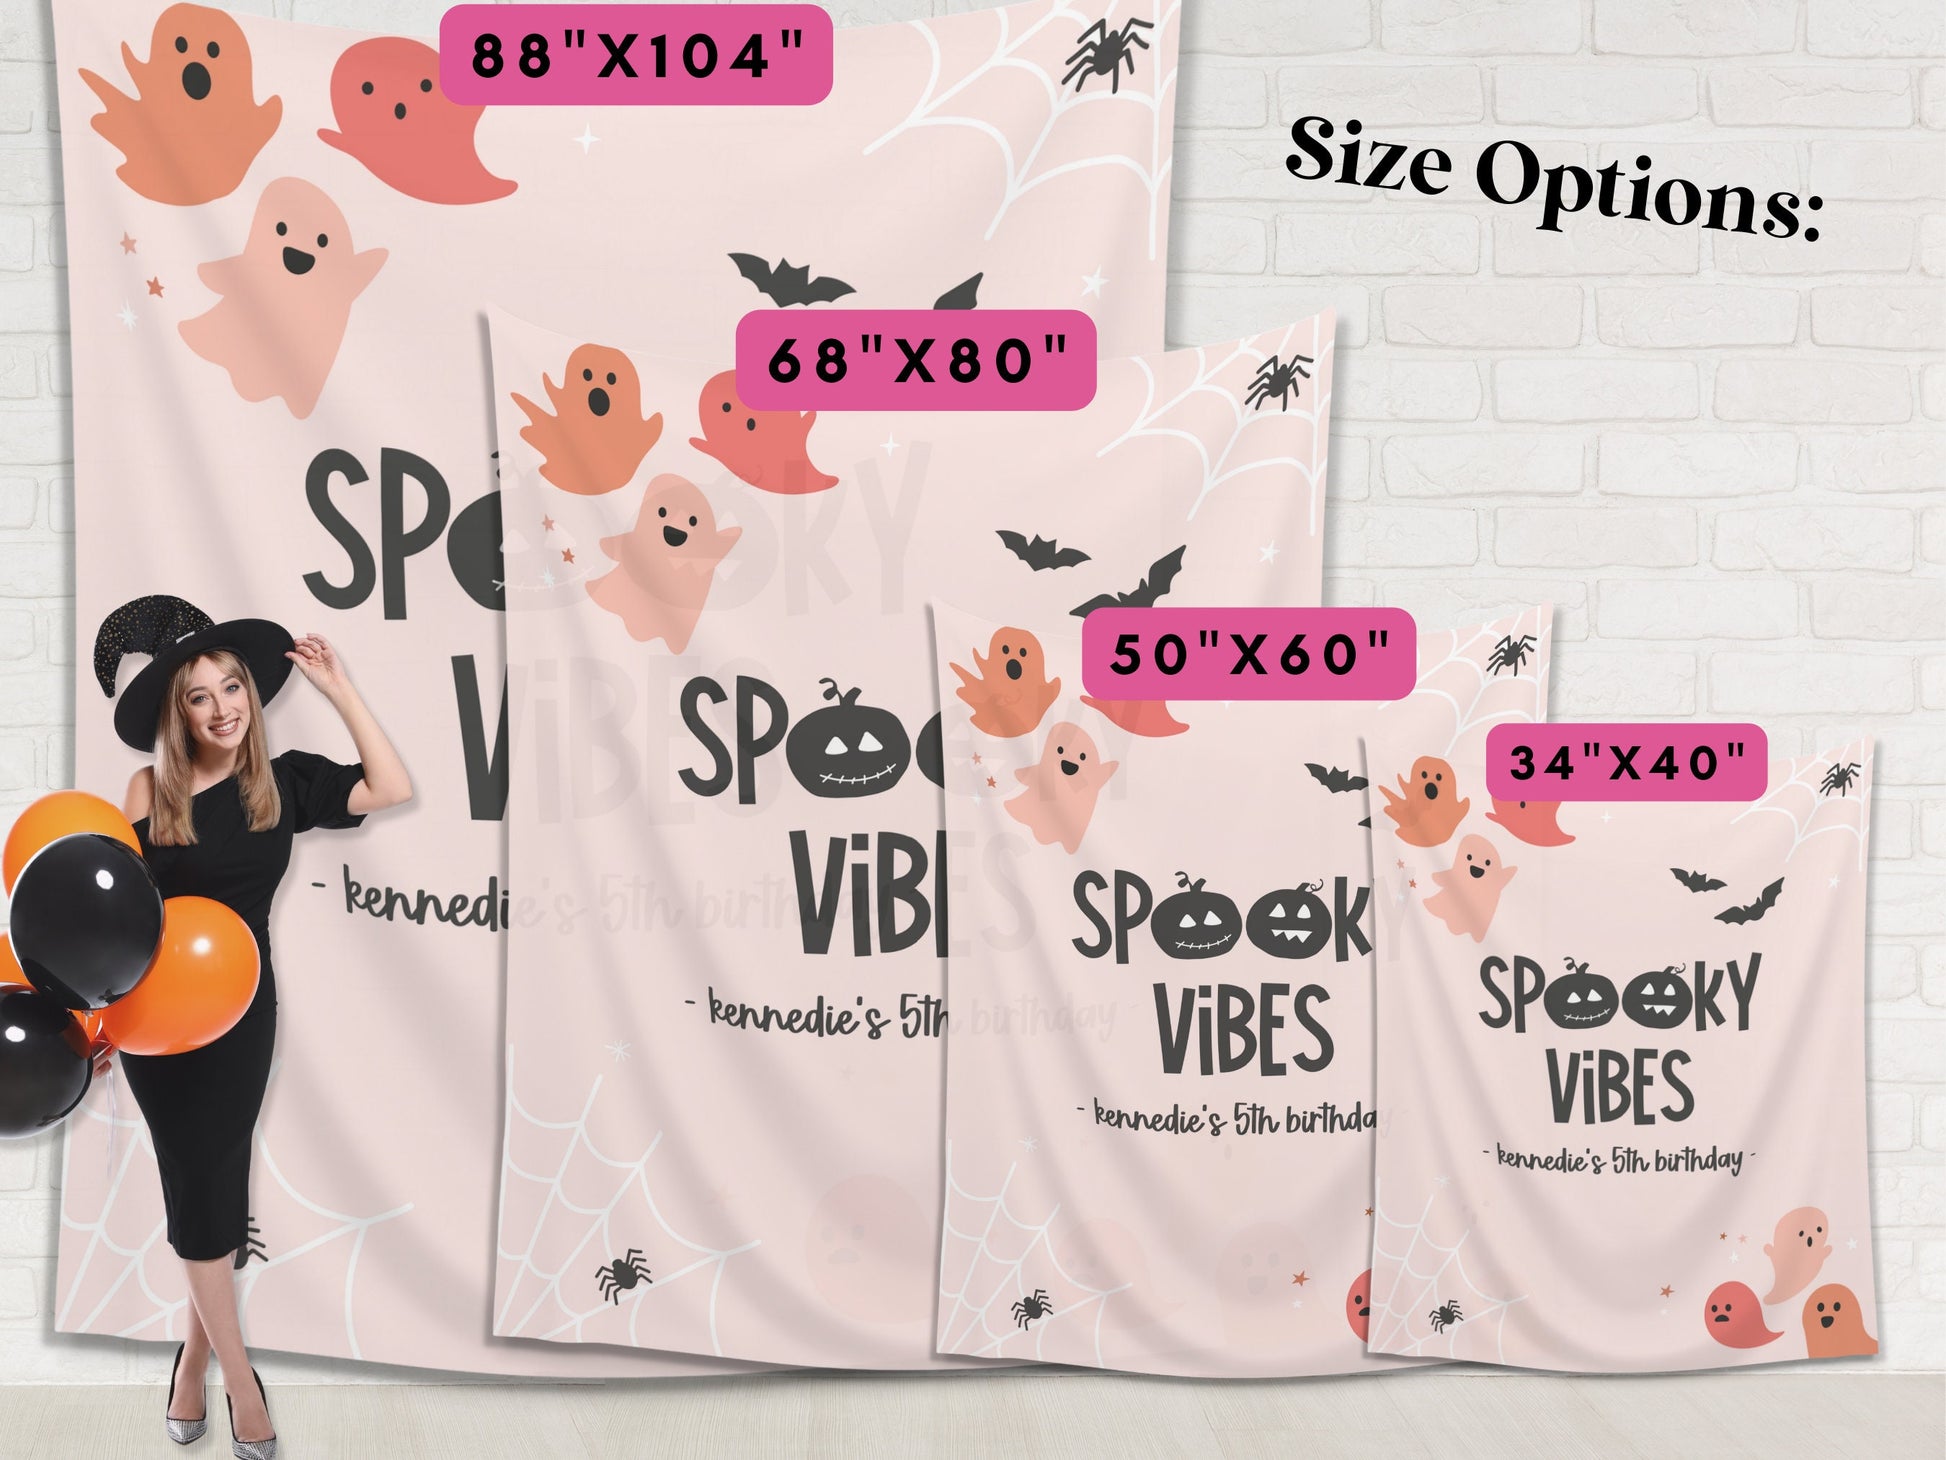 Spooky Vibes Ghost Halloween Banner | Customizable Text Ghoul Halloween Backdrop | Fall Birthday Party, Business Event or Baby Shower Décor